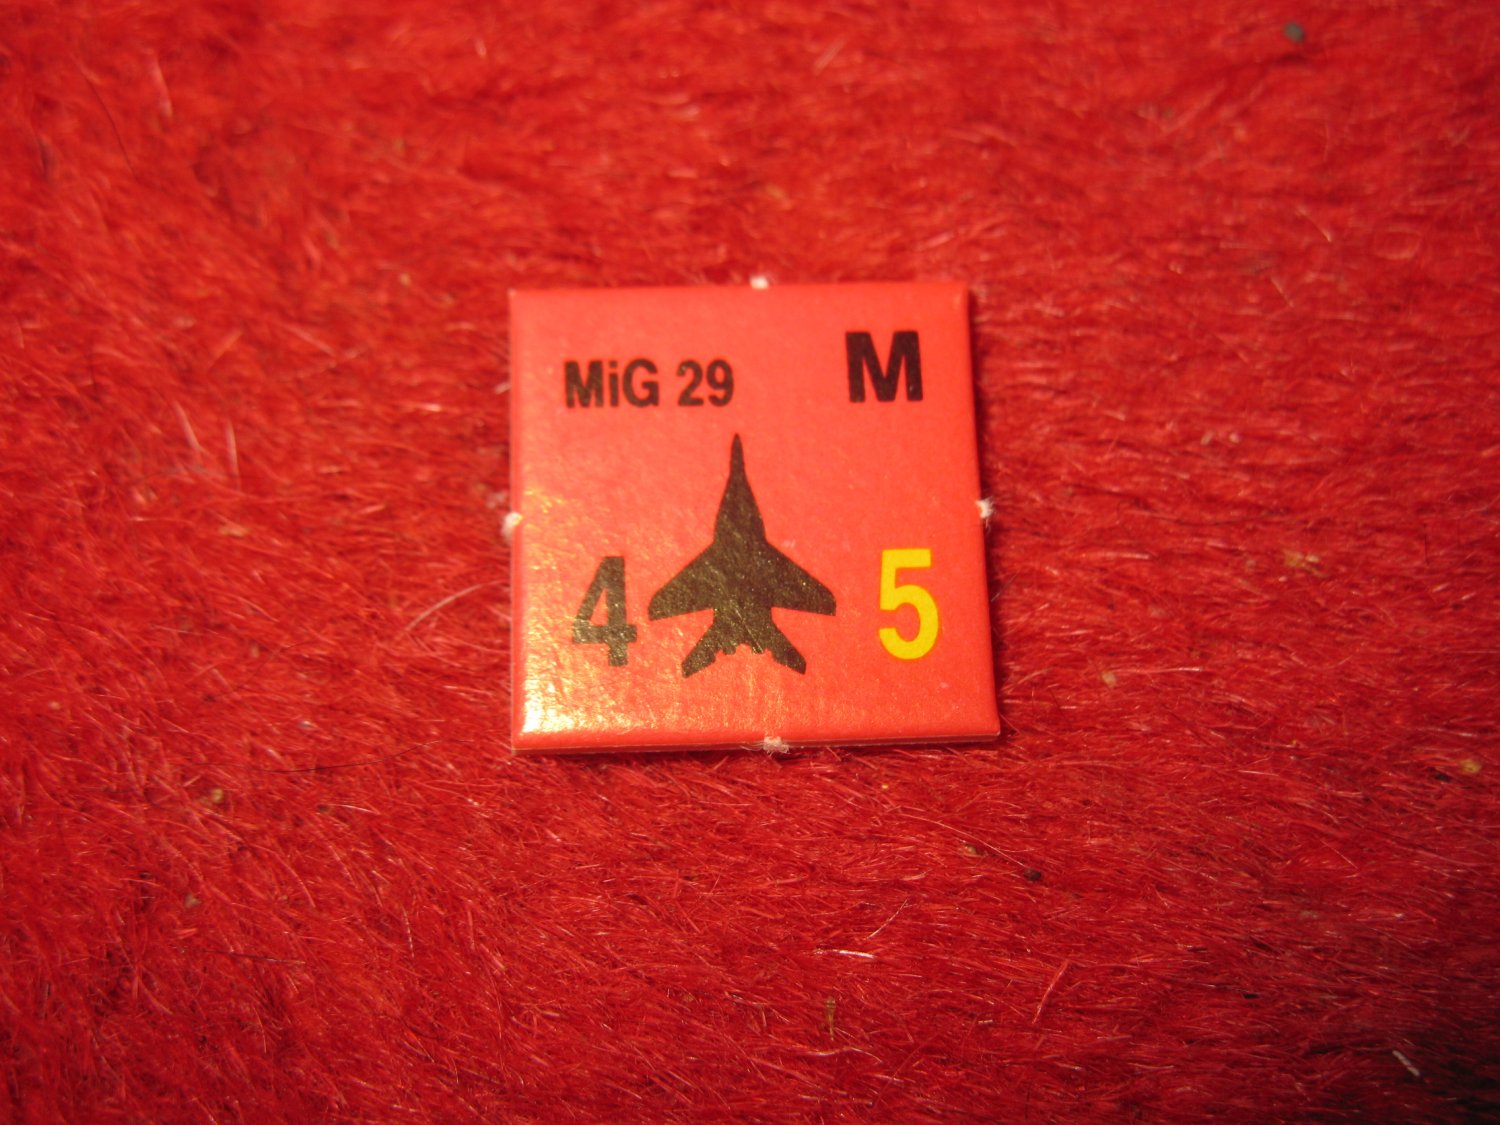 1988 The Hunt for Red October Board Game Piece: MIG 29 red Square Counter